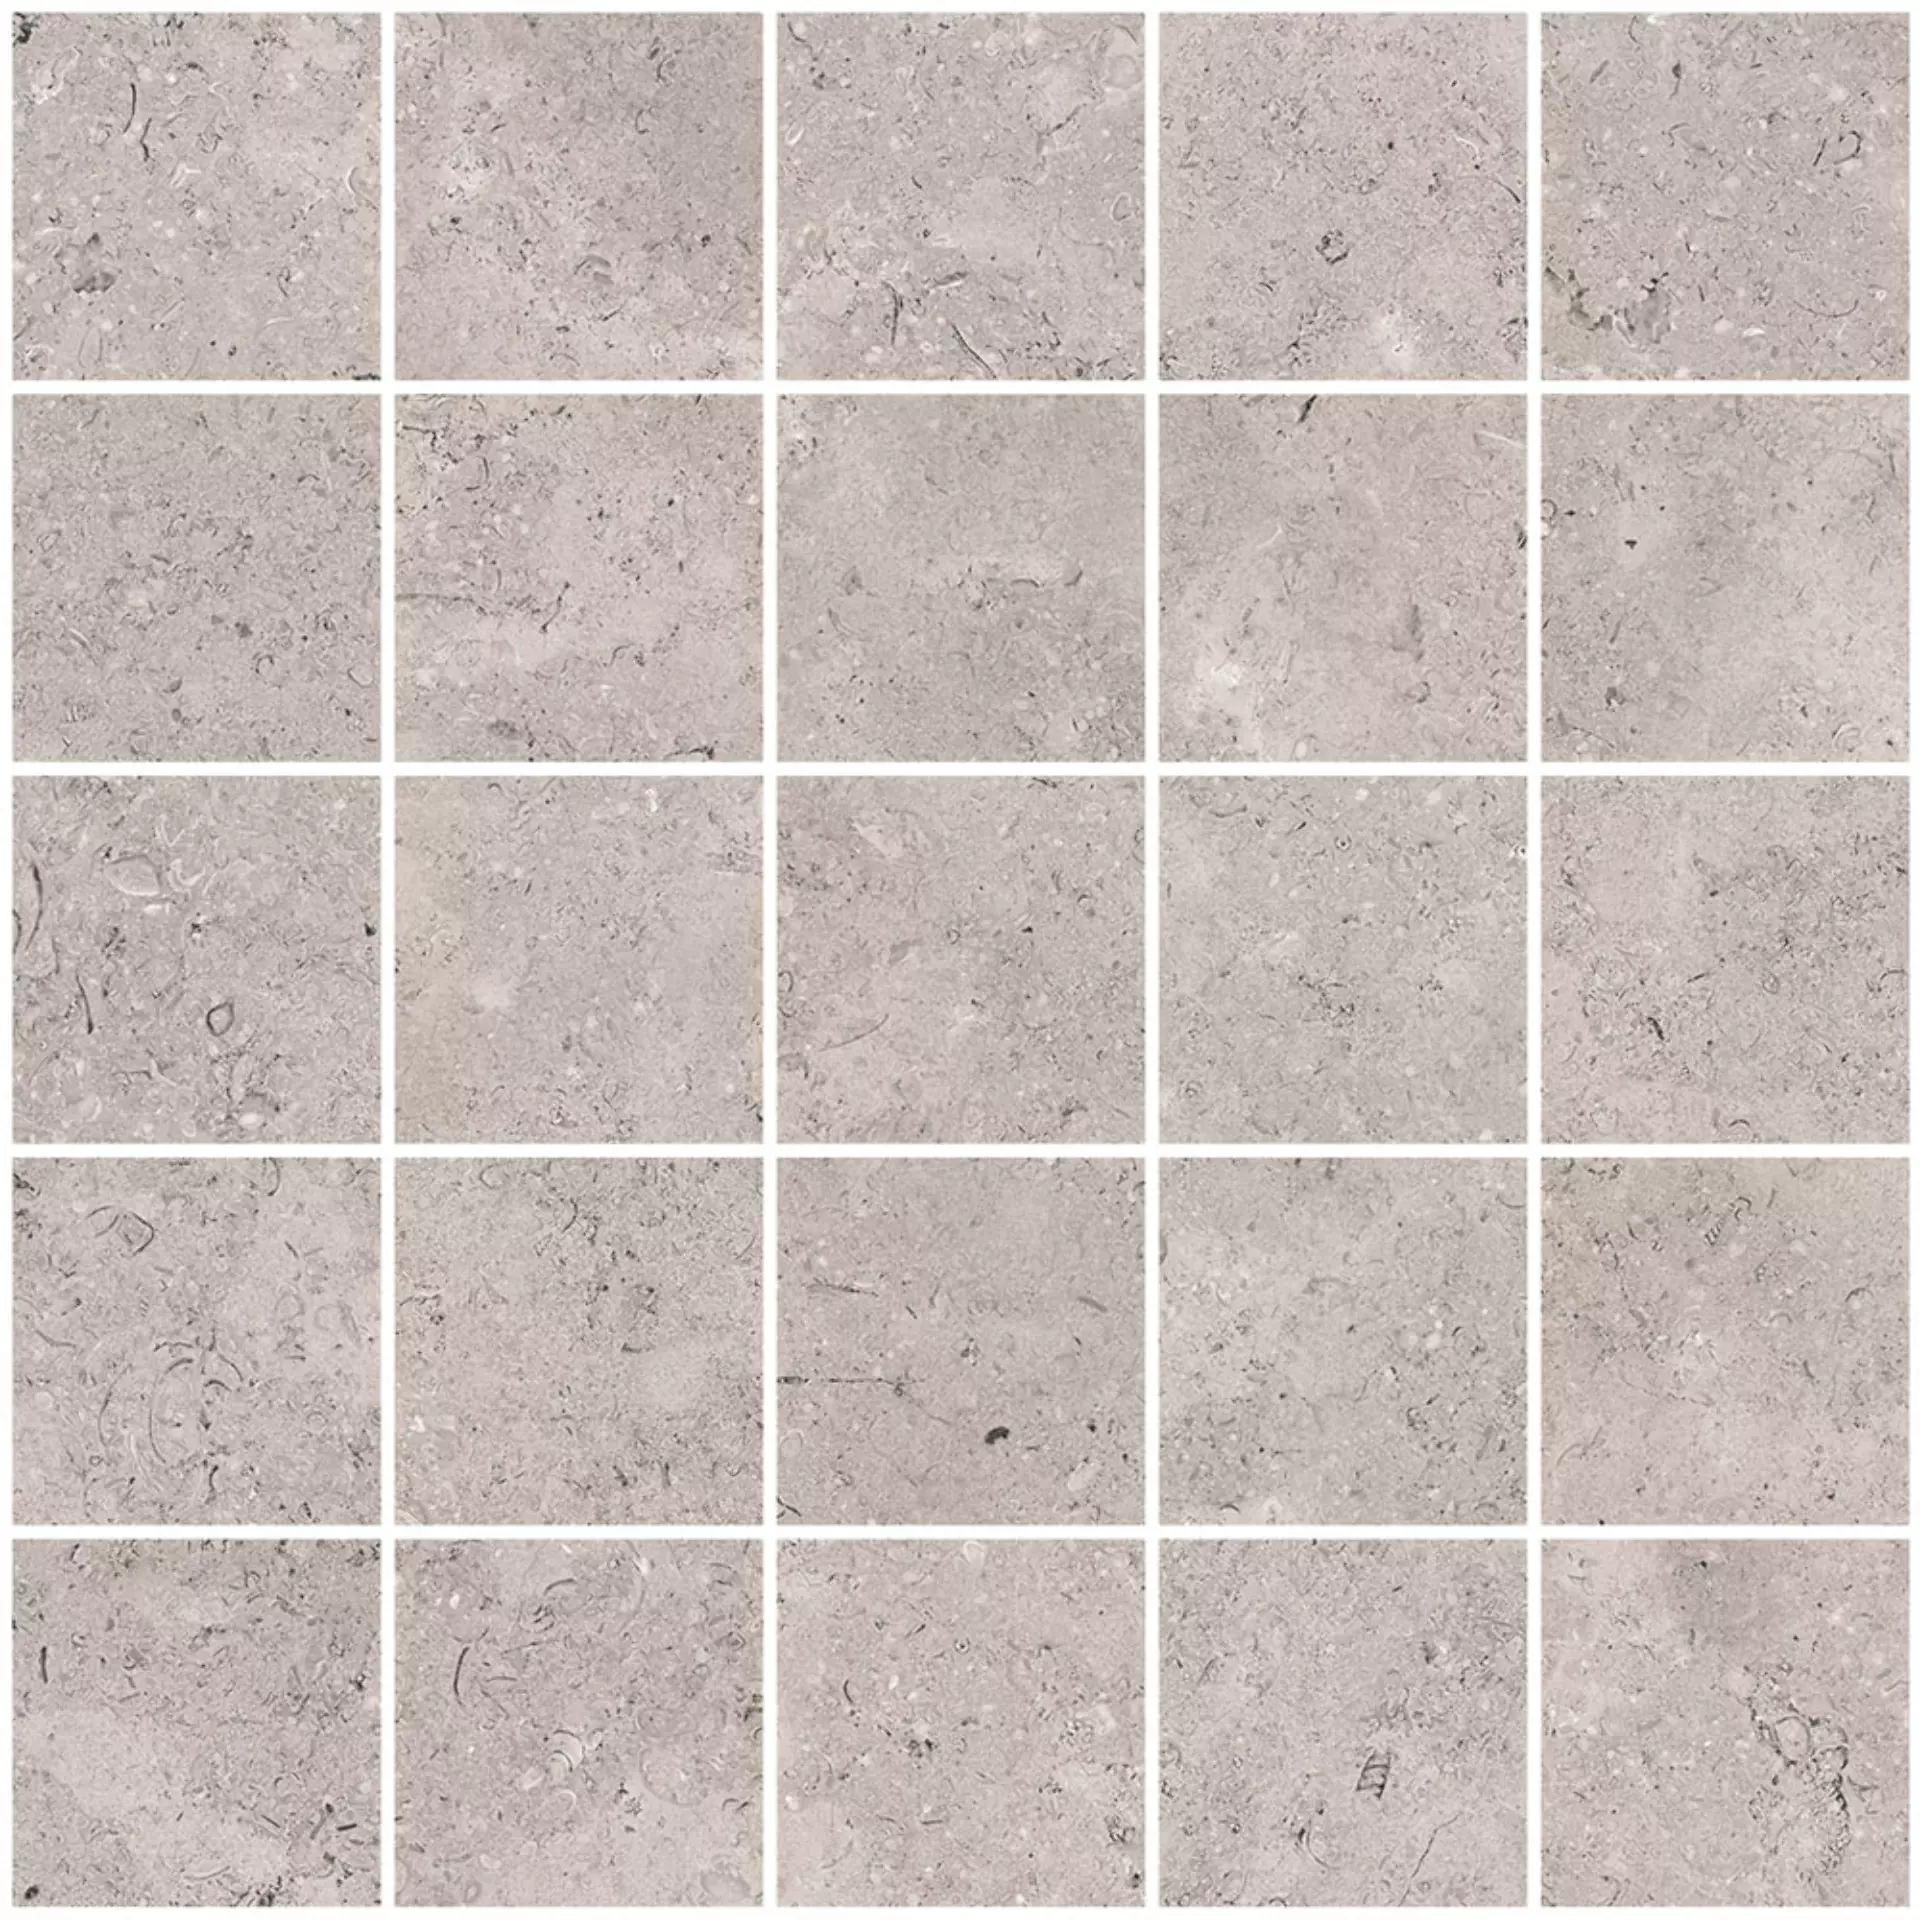 Sant Agostino Unionstone 2 Cedre Grey Natural Mosaic CSAMCEGR30 30x30cm rectified 10mm